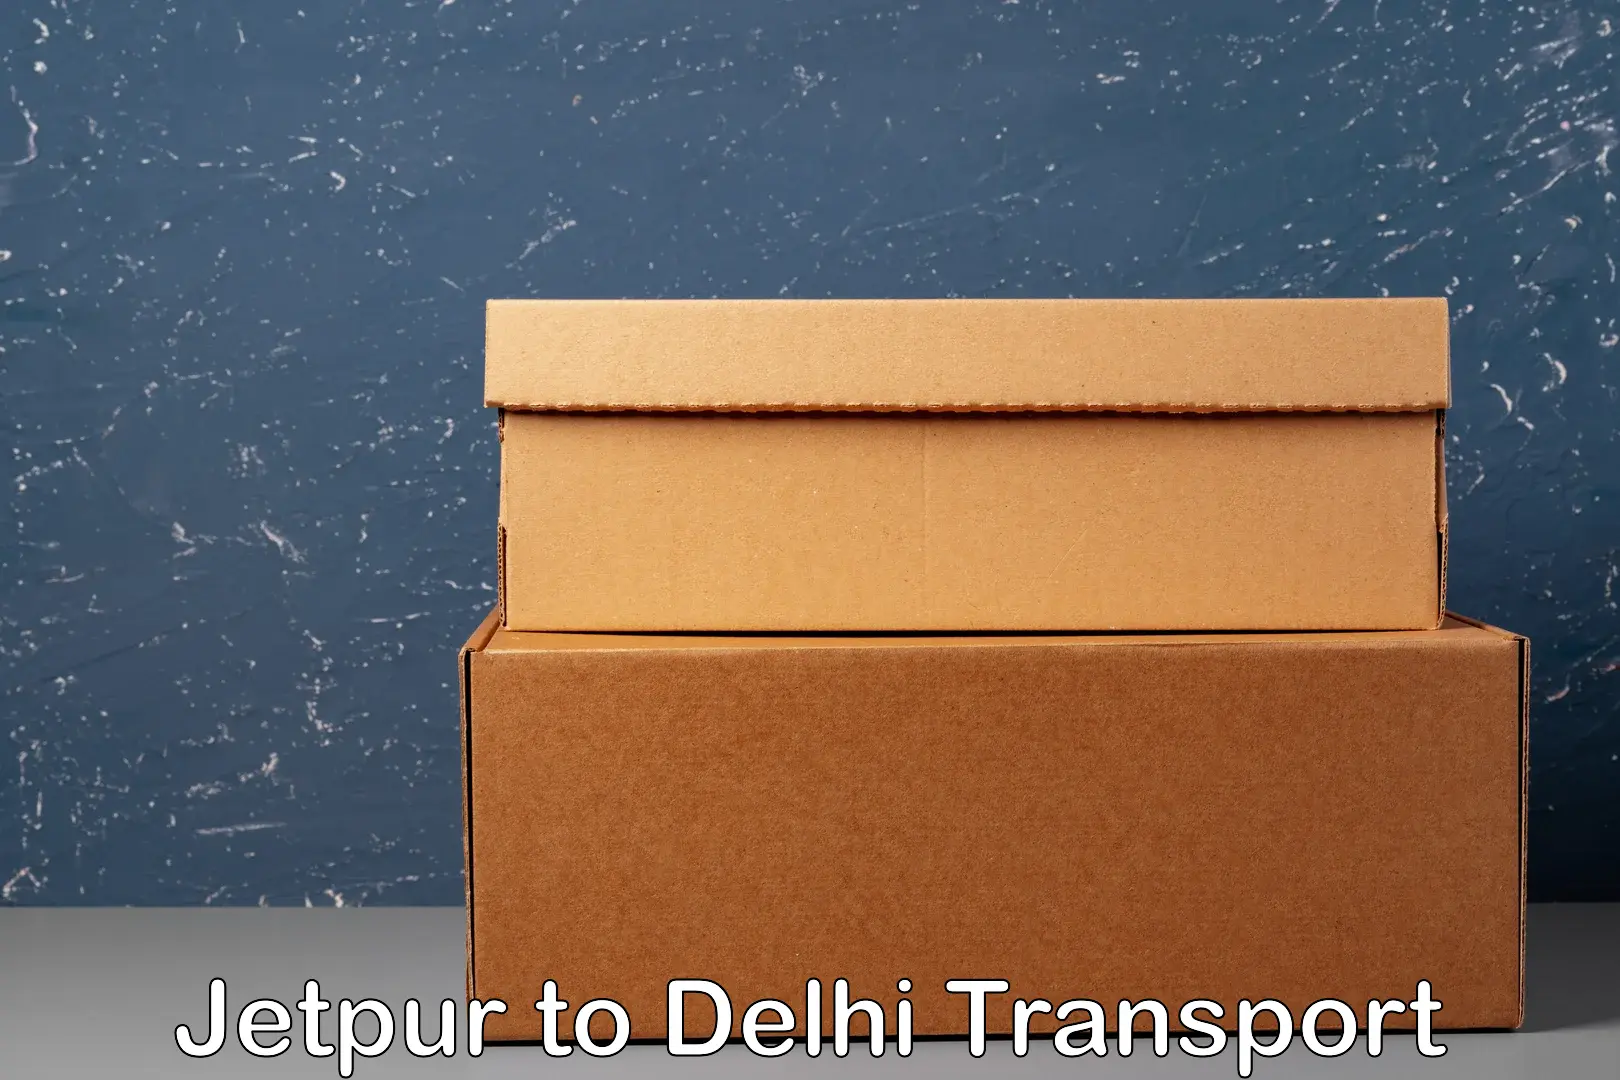 Air freight transport services Jetpur to East Delhi